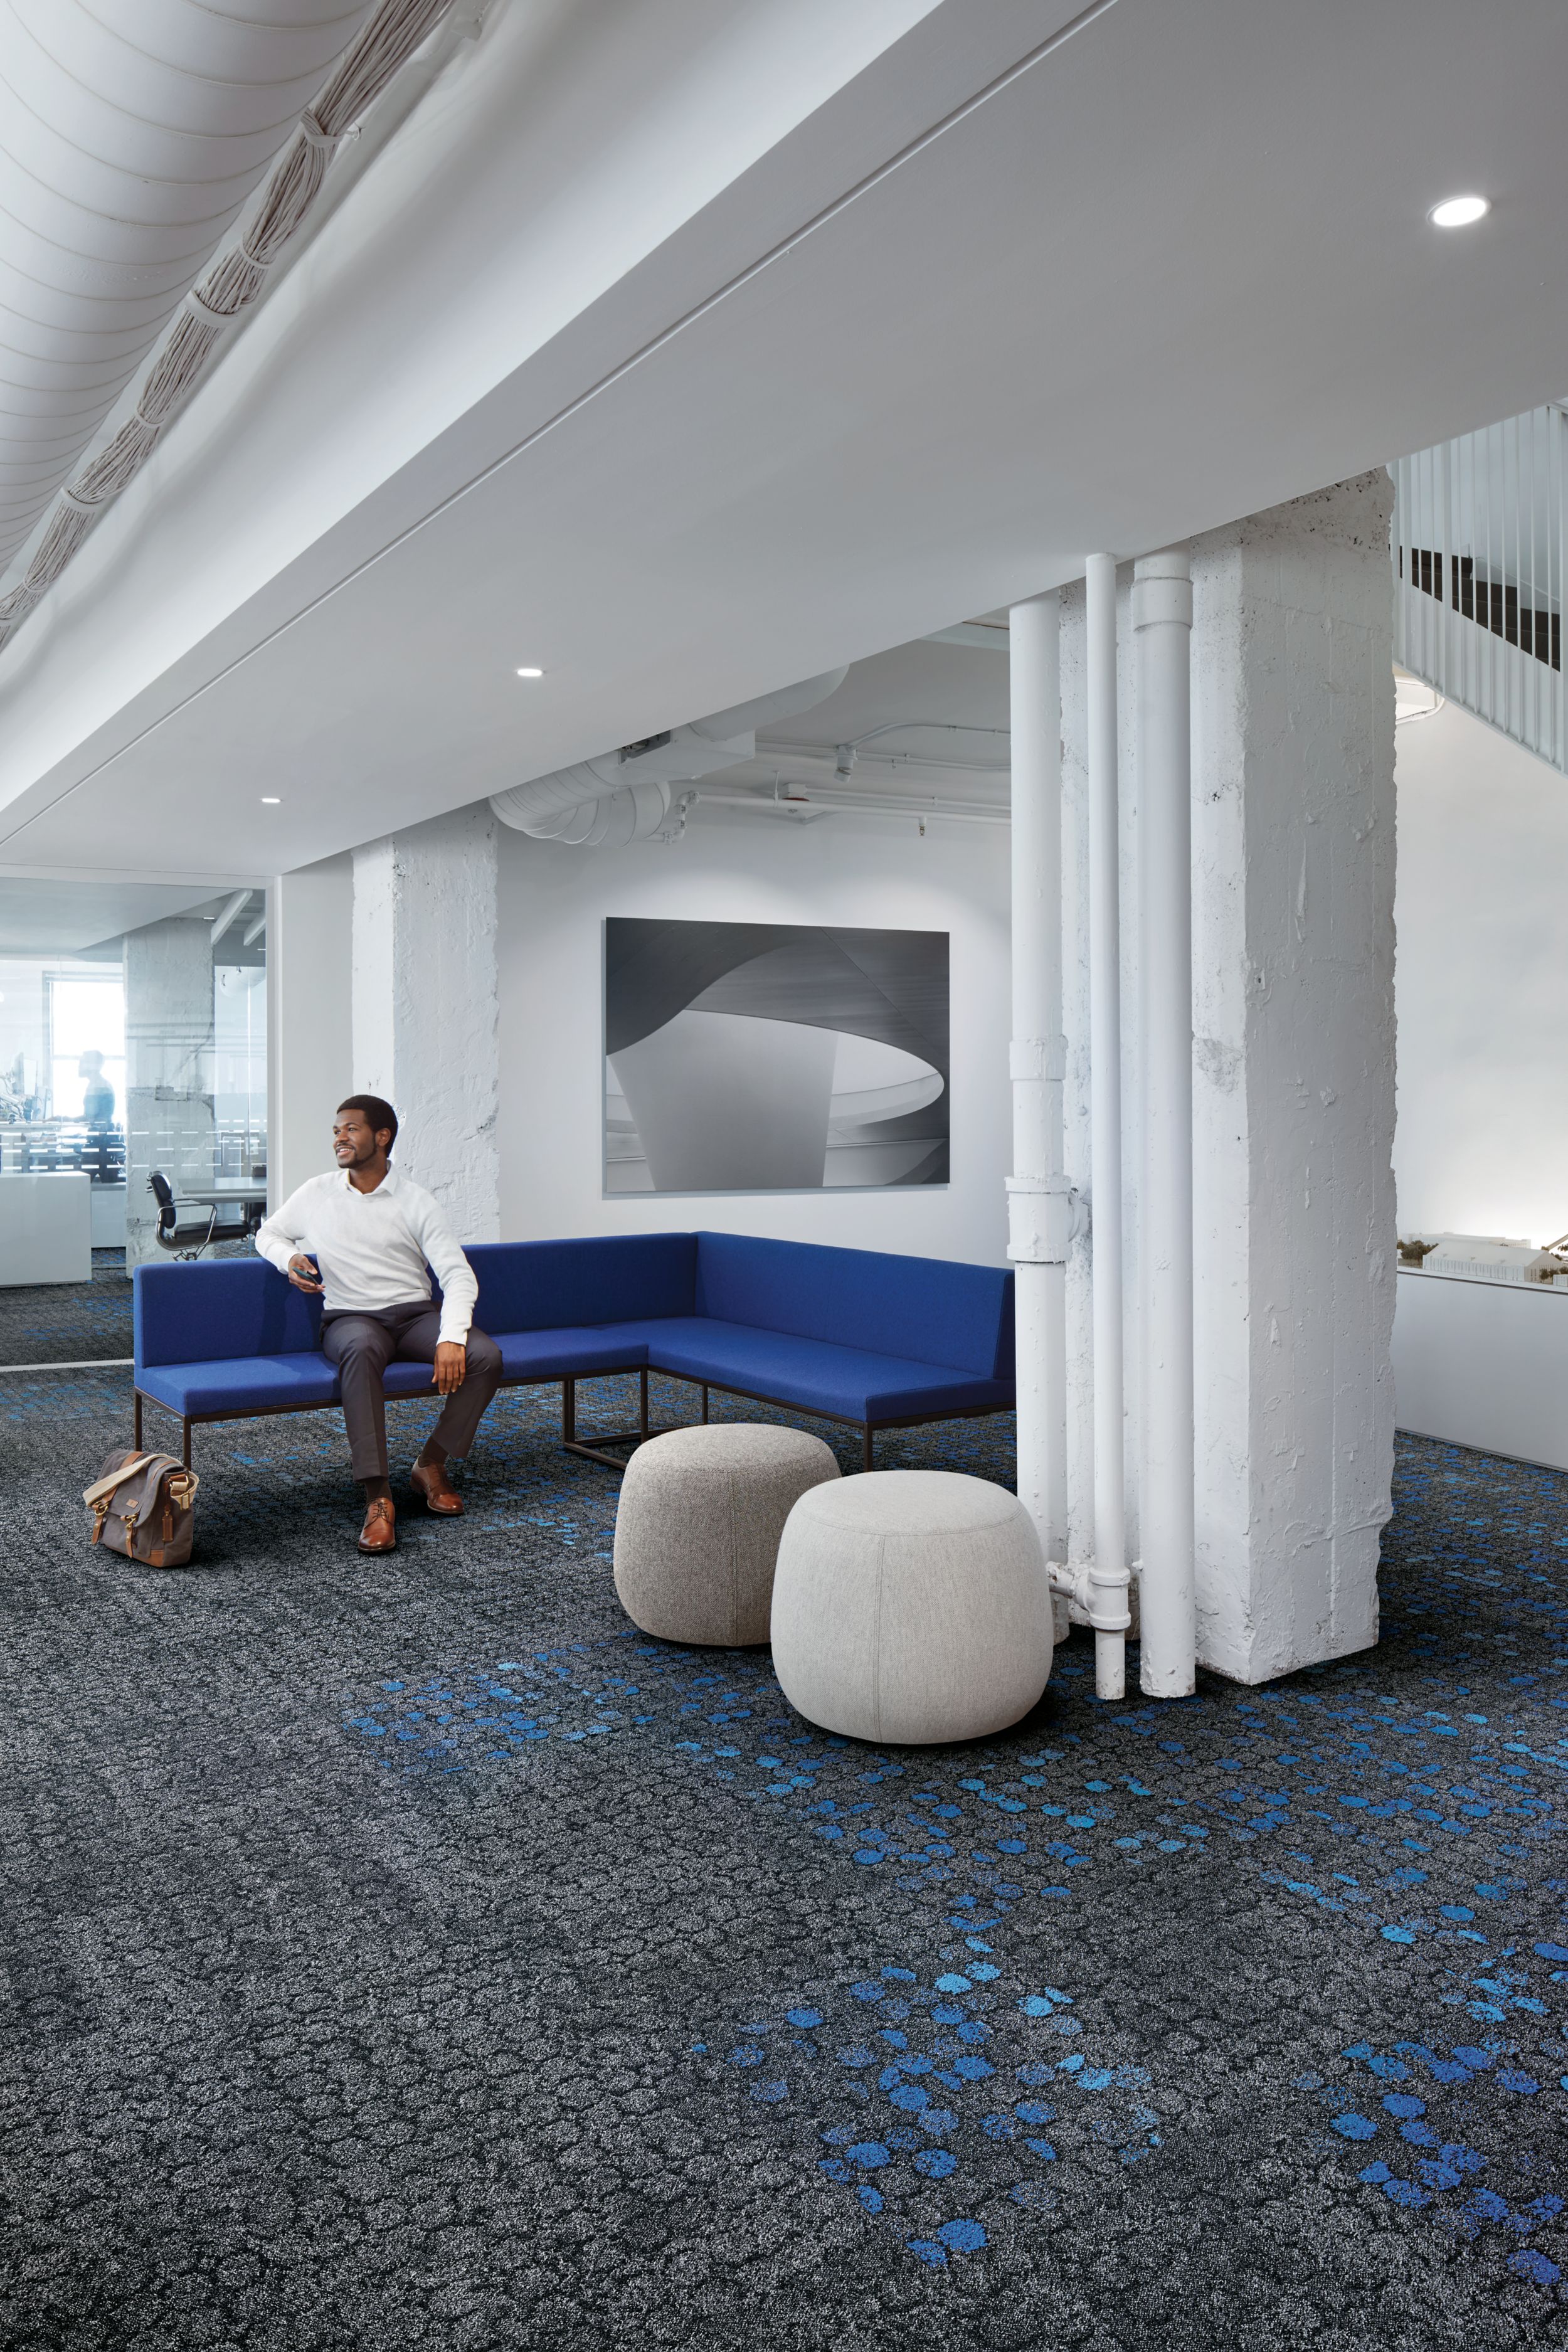 Interface Broome Street and Mercer Street carpet tile in lobby with man seated on blue couch número de imagen 6